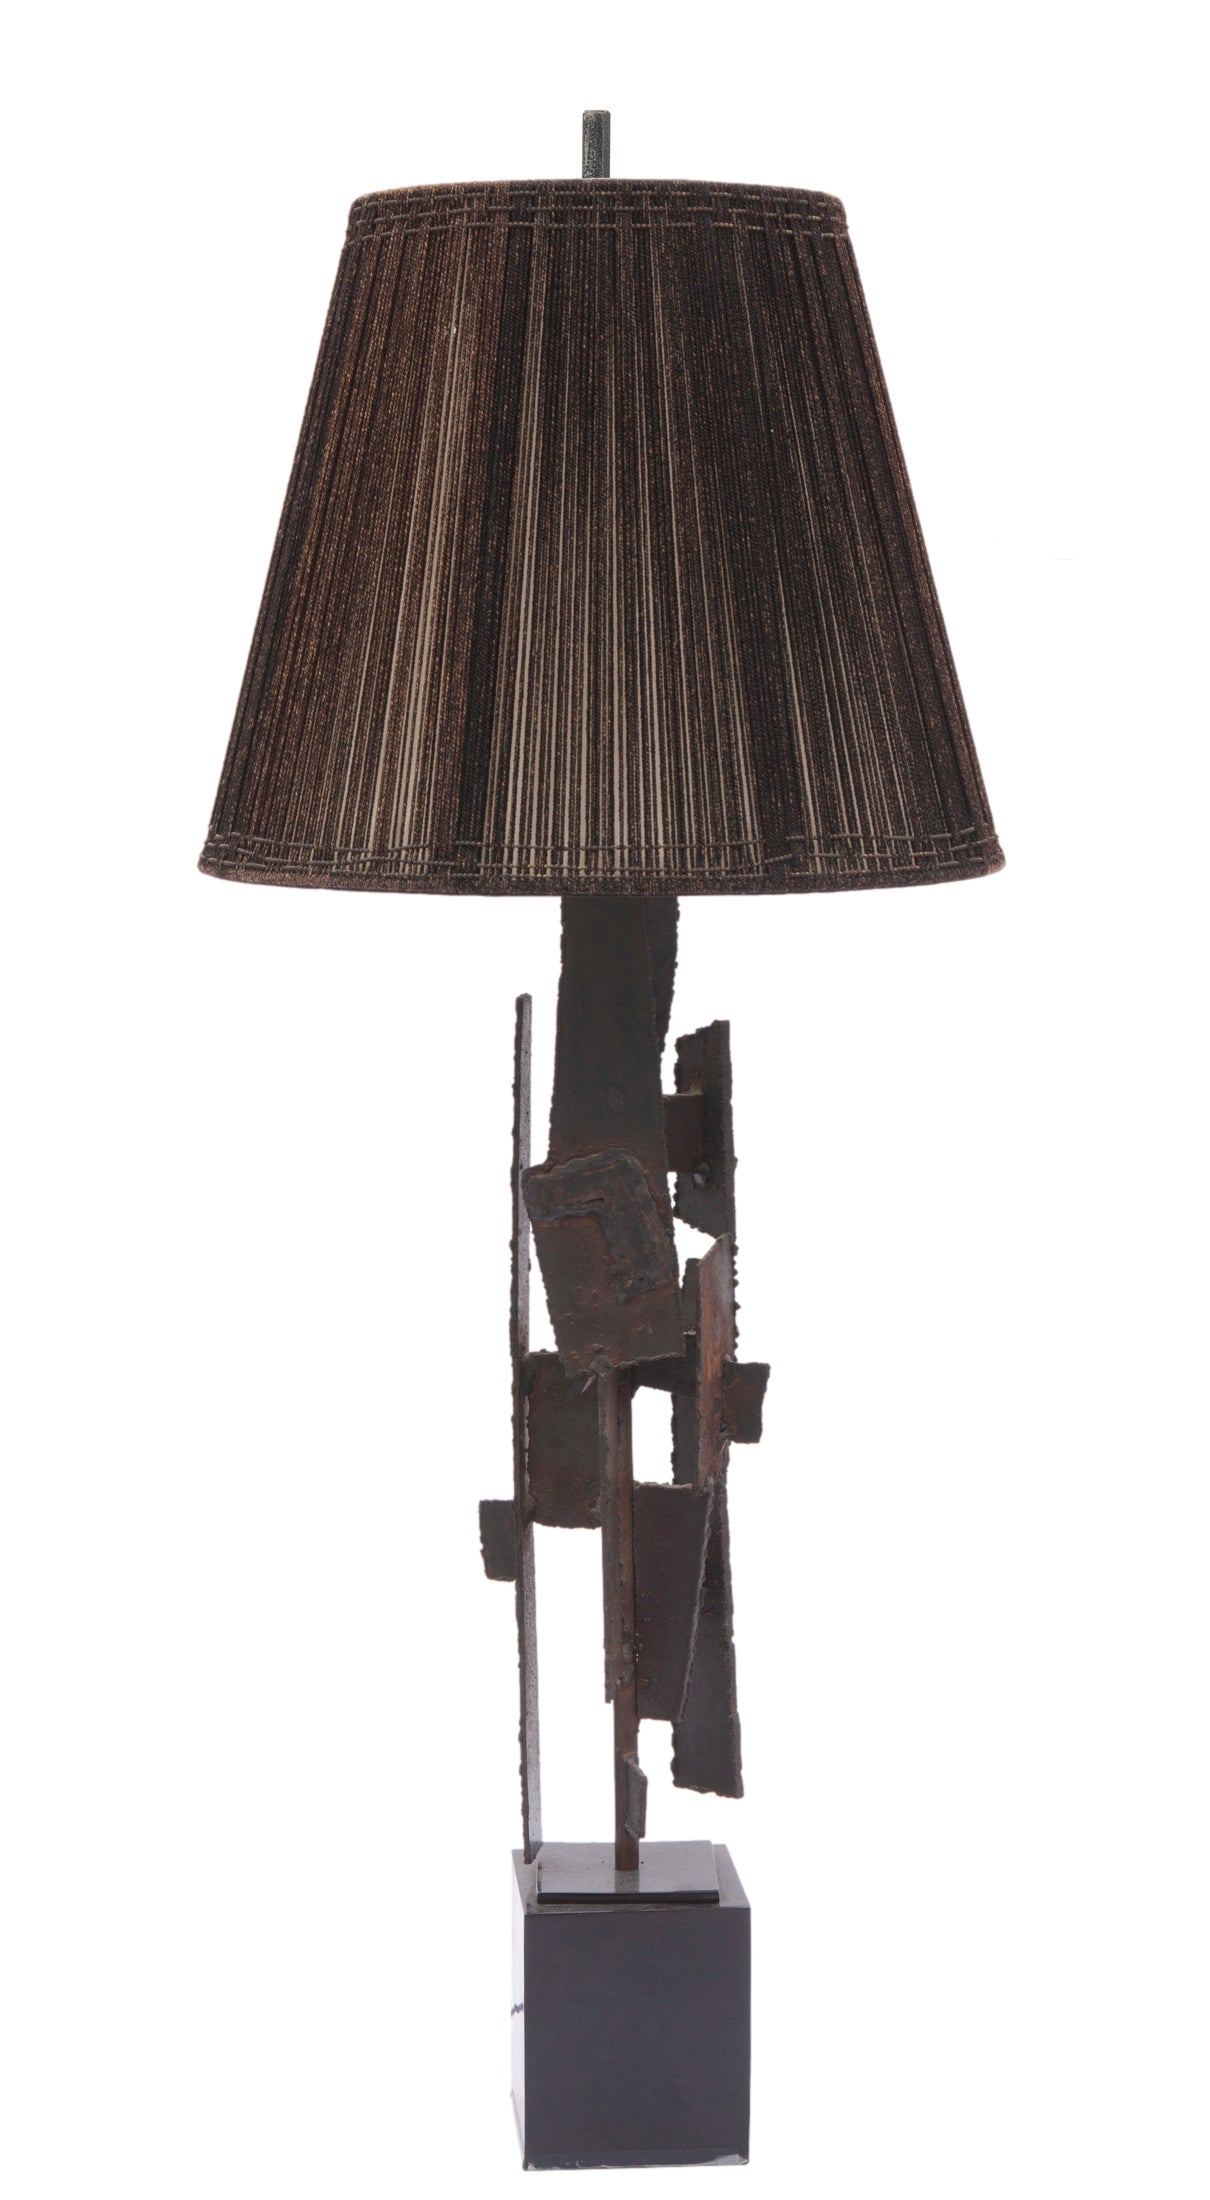 Mid Century Brutalist iron table lamp
Mid-Century Modern Brutalist iron sculptural lamp in black & rust.The sculpture of torch cut steel in a beautiful sculptural form is mounted on a cube. 
Measures: 5